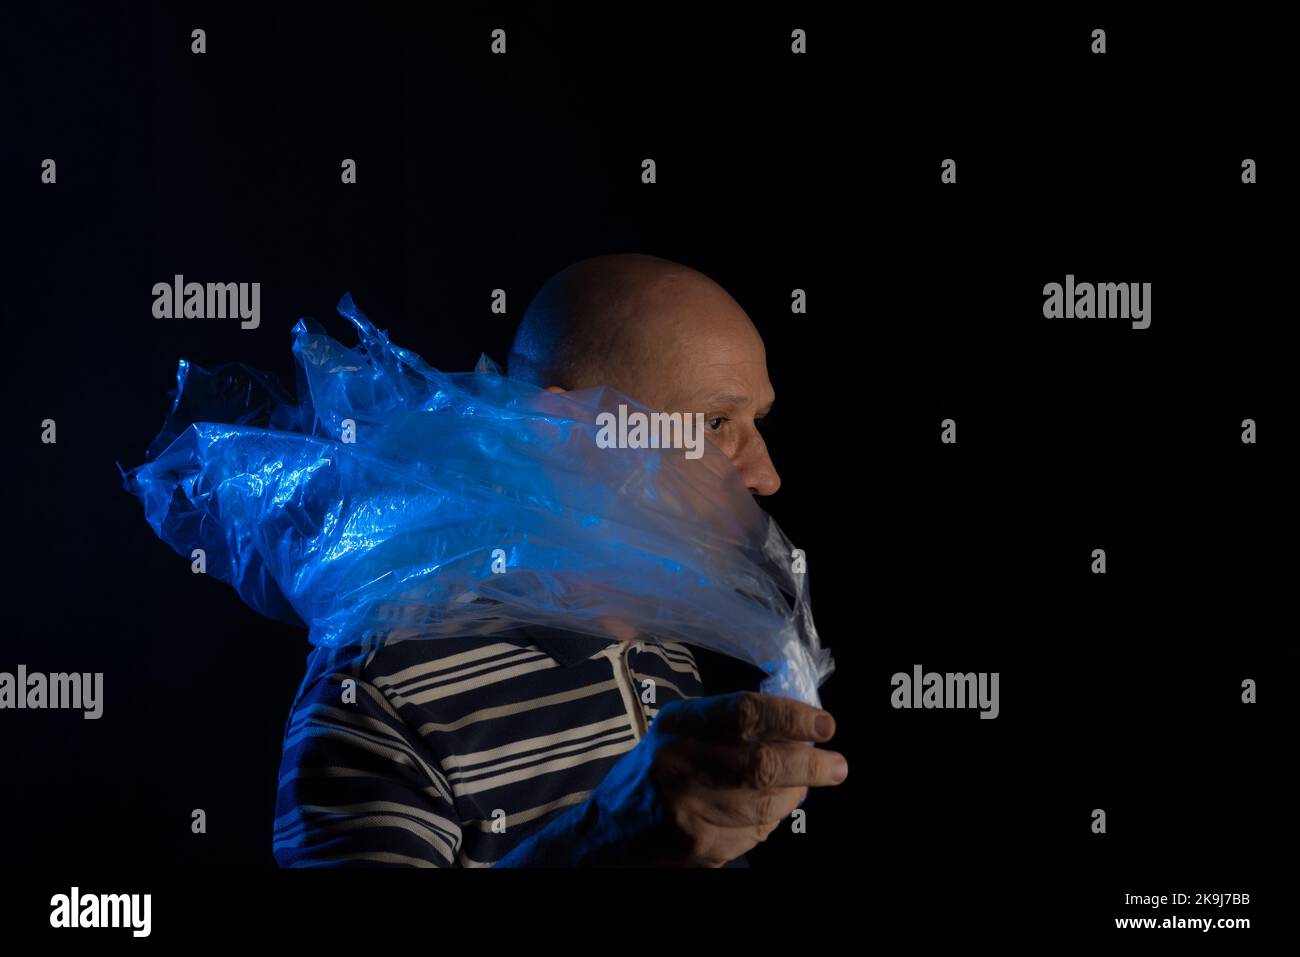 Mature man with a transparent plastic blue bag flying over his head and face. suffocate. face in a plastic bag, strangulation Stock Photo